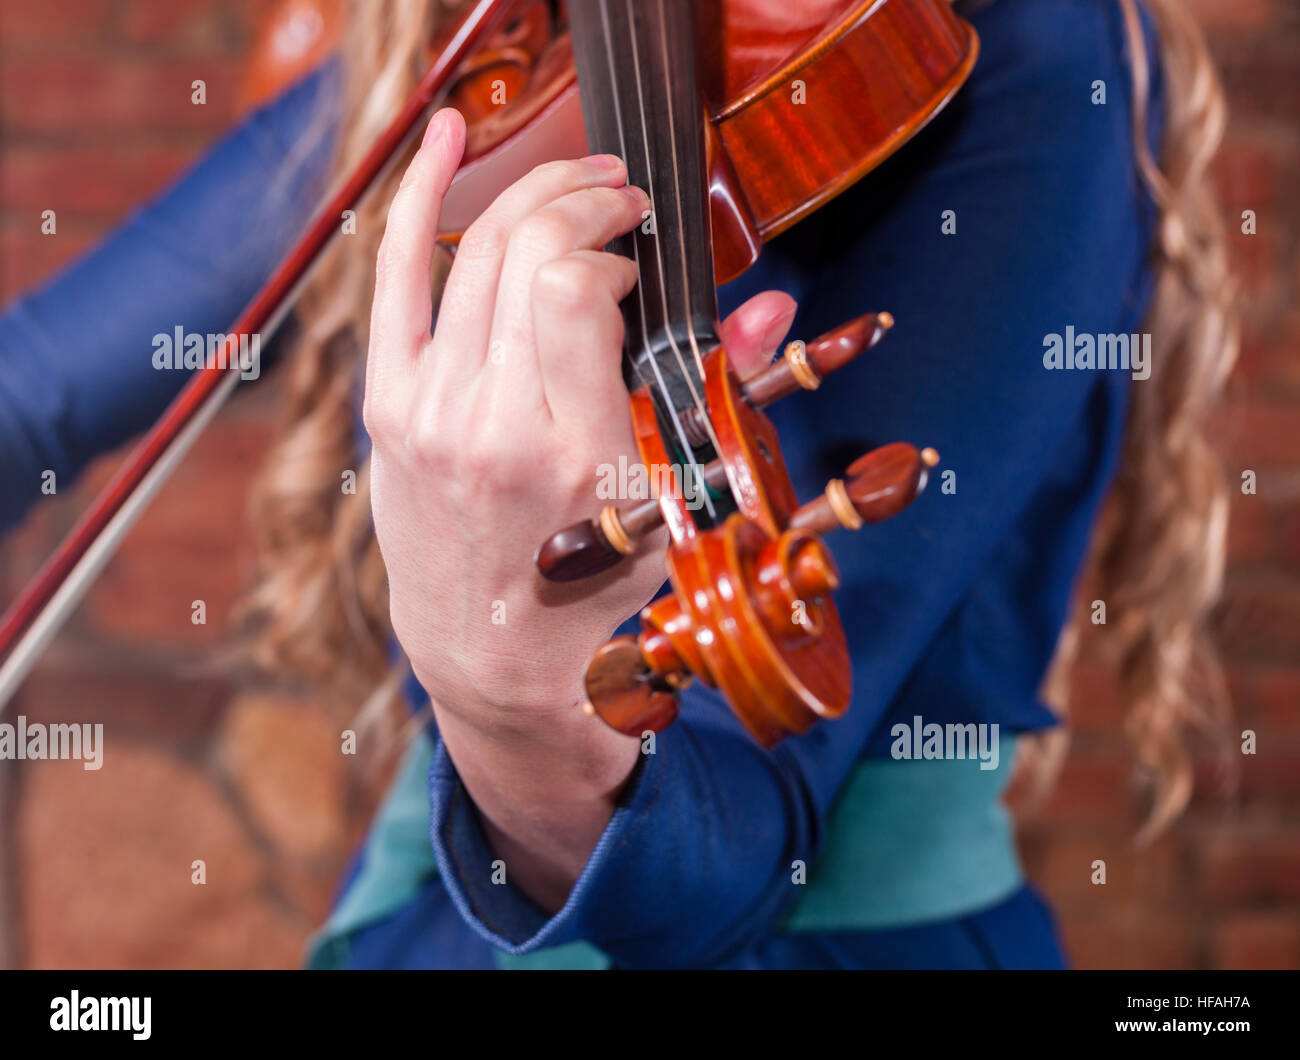 A woman playing music on a violin Stock Photo